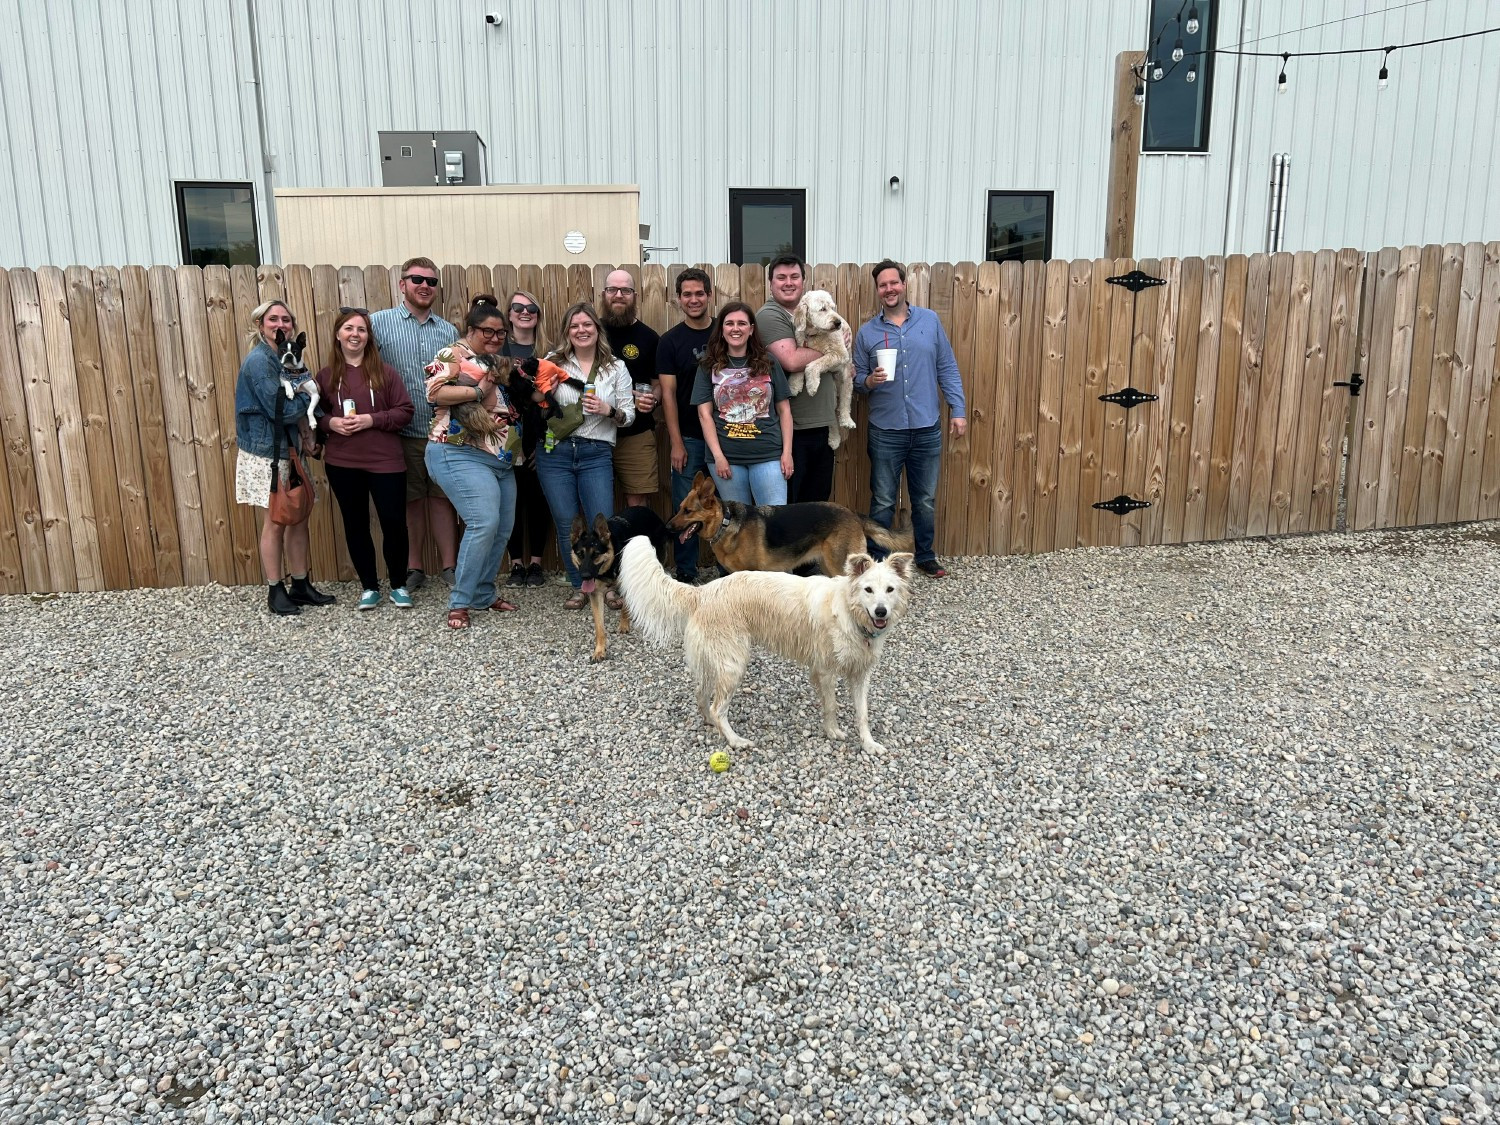 Members of the Herd enjoyed a dog-friendly outing at a local dog-park bar